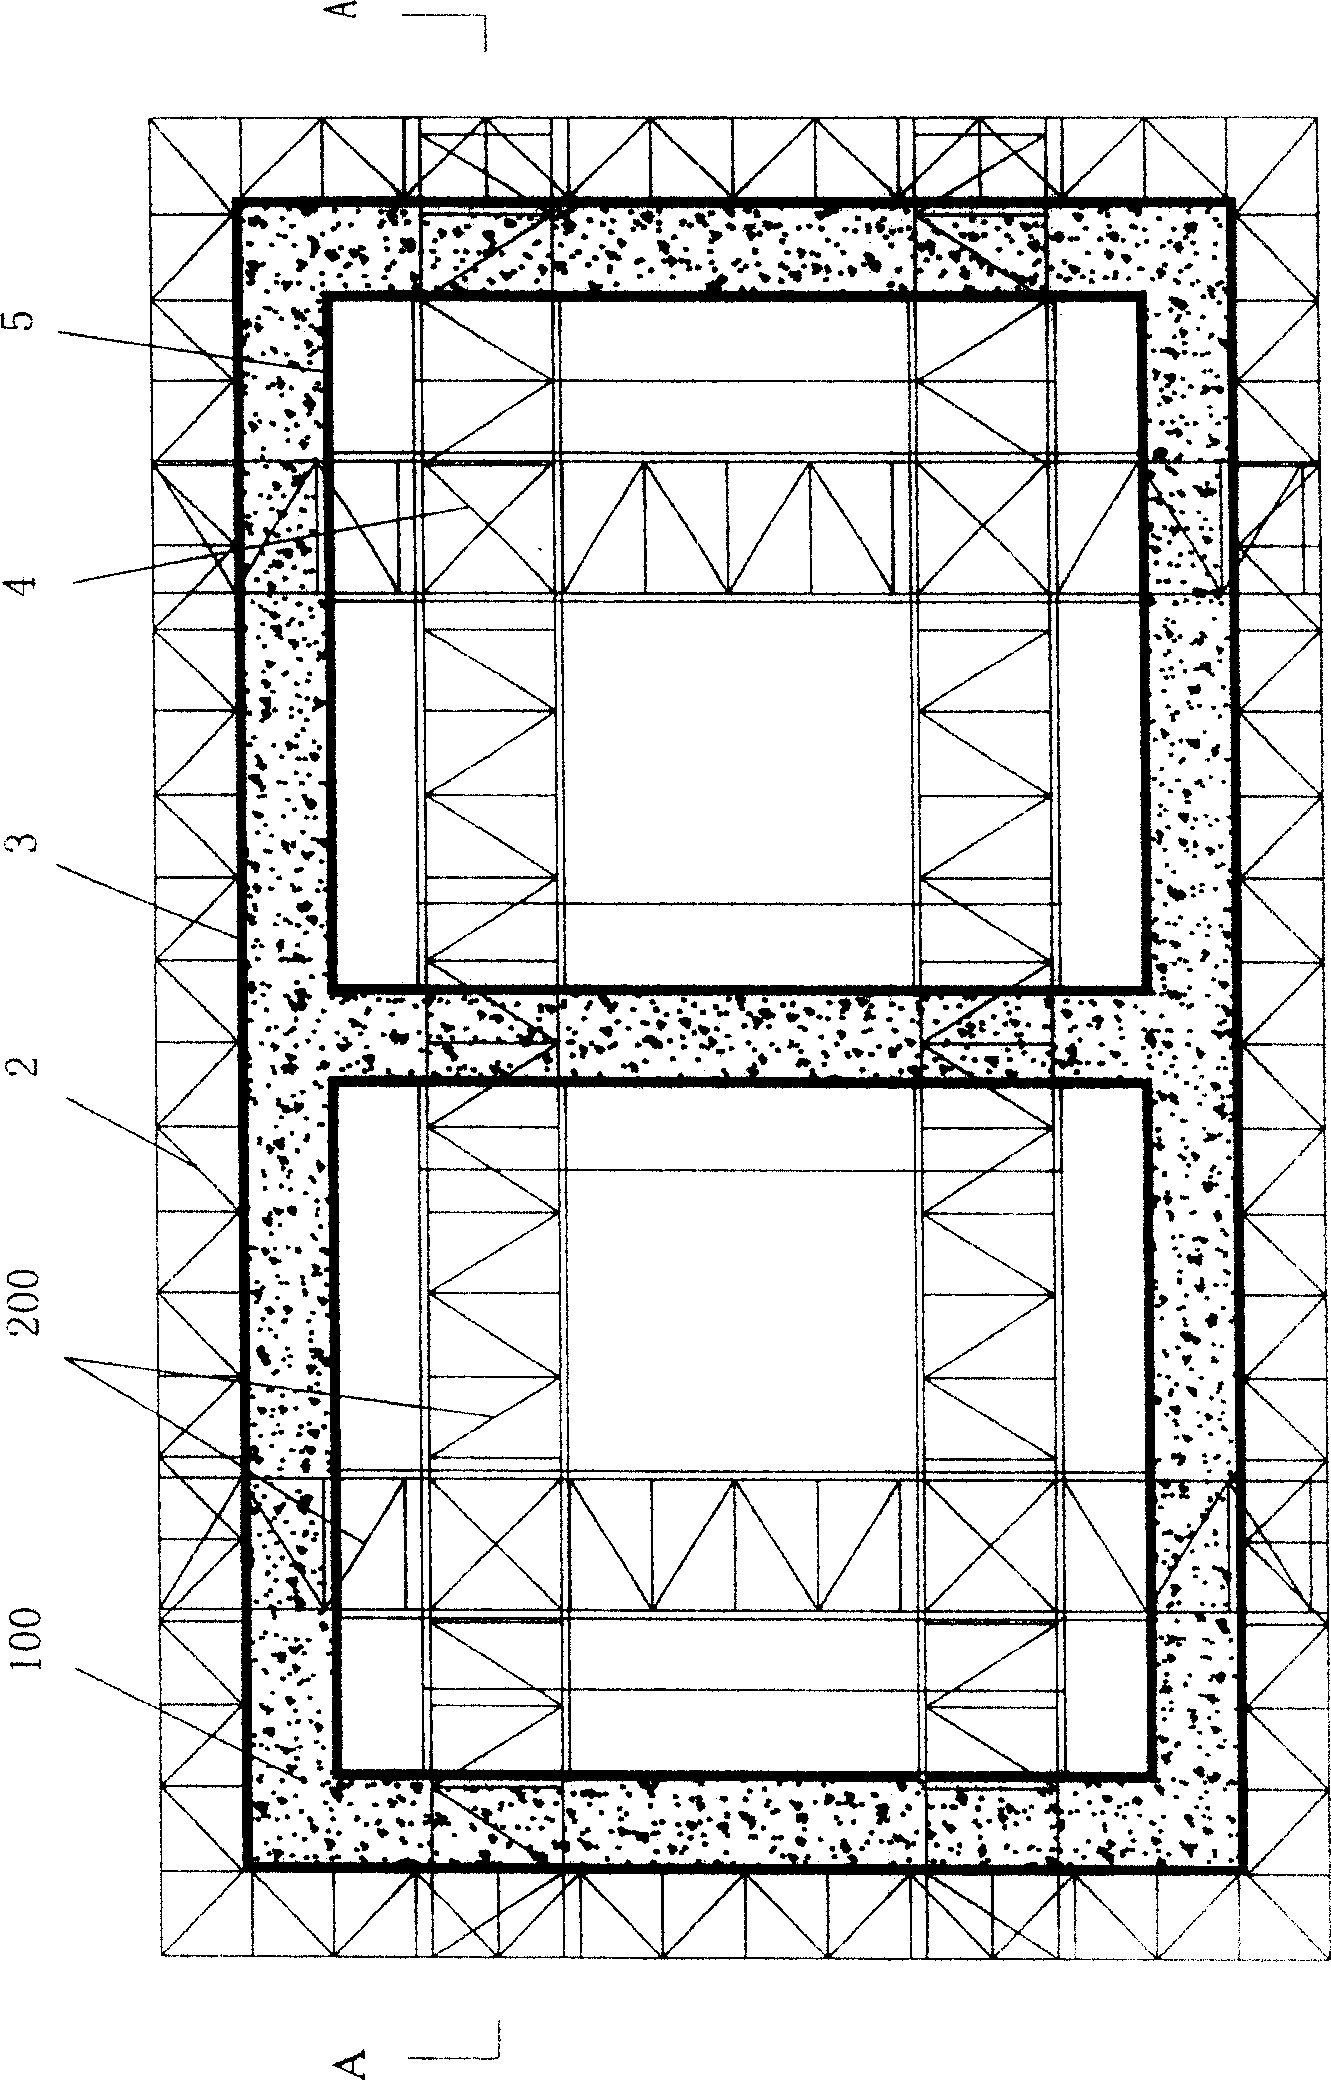 Reciprocating self-climbing type climbing form system and its climbing form method